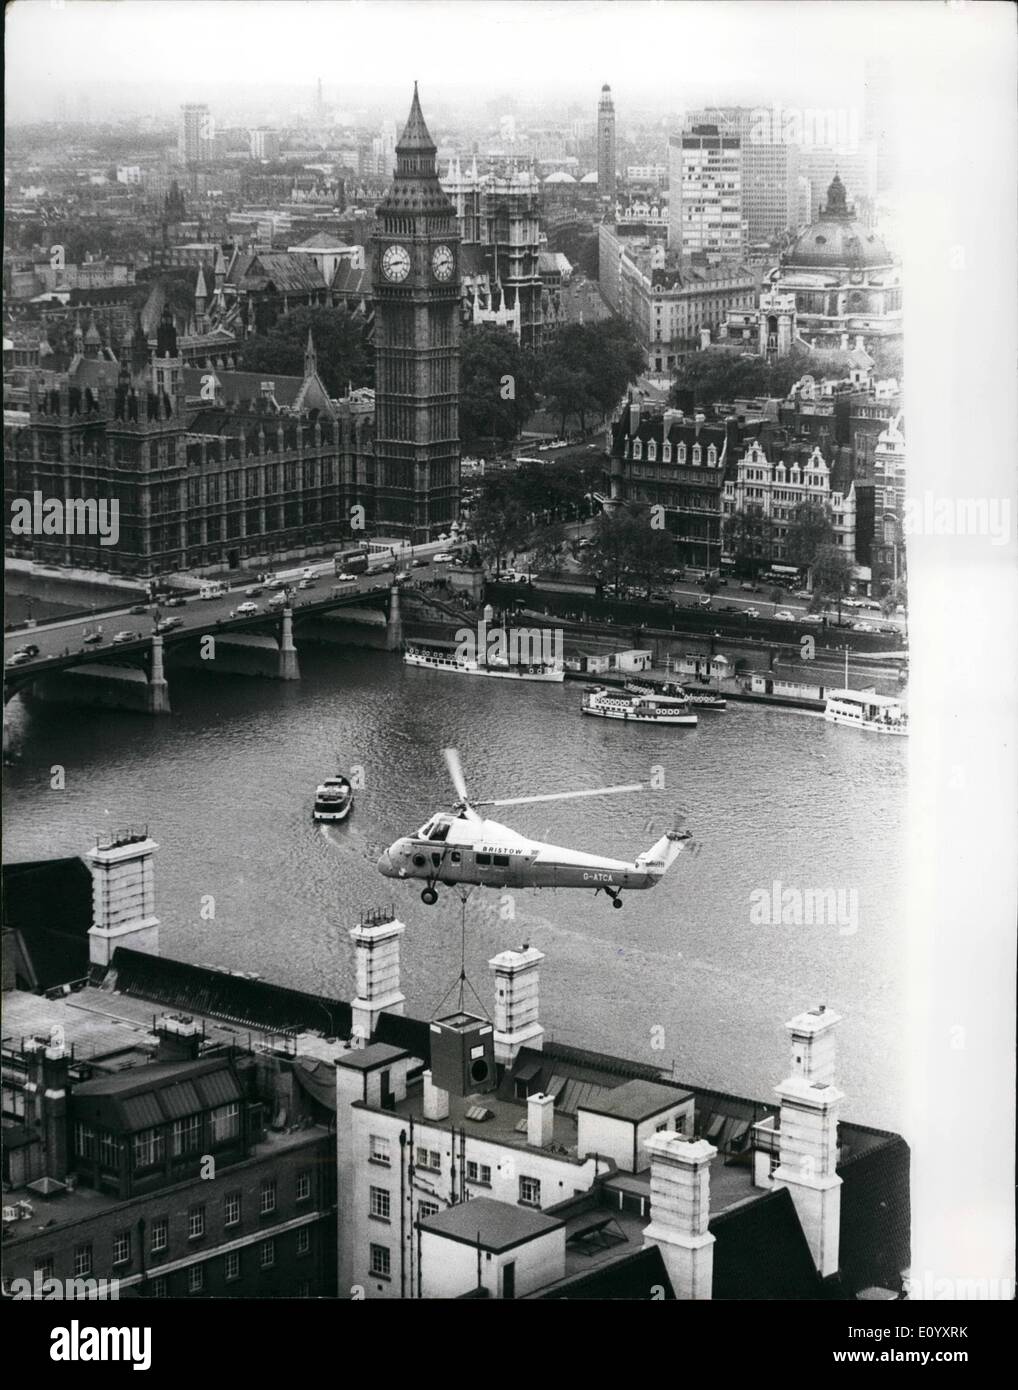 Oct. 10, 1971 - Helicopter Airlift At County Hall: The problem of how to lift two steel cooling towers, each weighing 1 1/2tons, on to the roof of County Hall, London, was solved today - by helicopter. The airlift took place when the two towers, part of the environmental control system for the Greater London Council's new computer suite was hoisted on the roof nearly 130ft above the Thames. The lift was made by a Wessex helicopter. The environmental system in the computer suite keeps temperature, humidity and dust at acceptable levels, to ensure efficient working Stock Photo